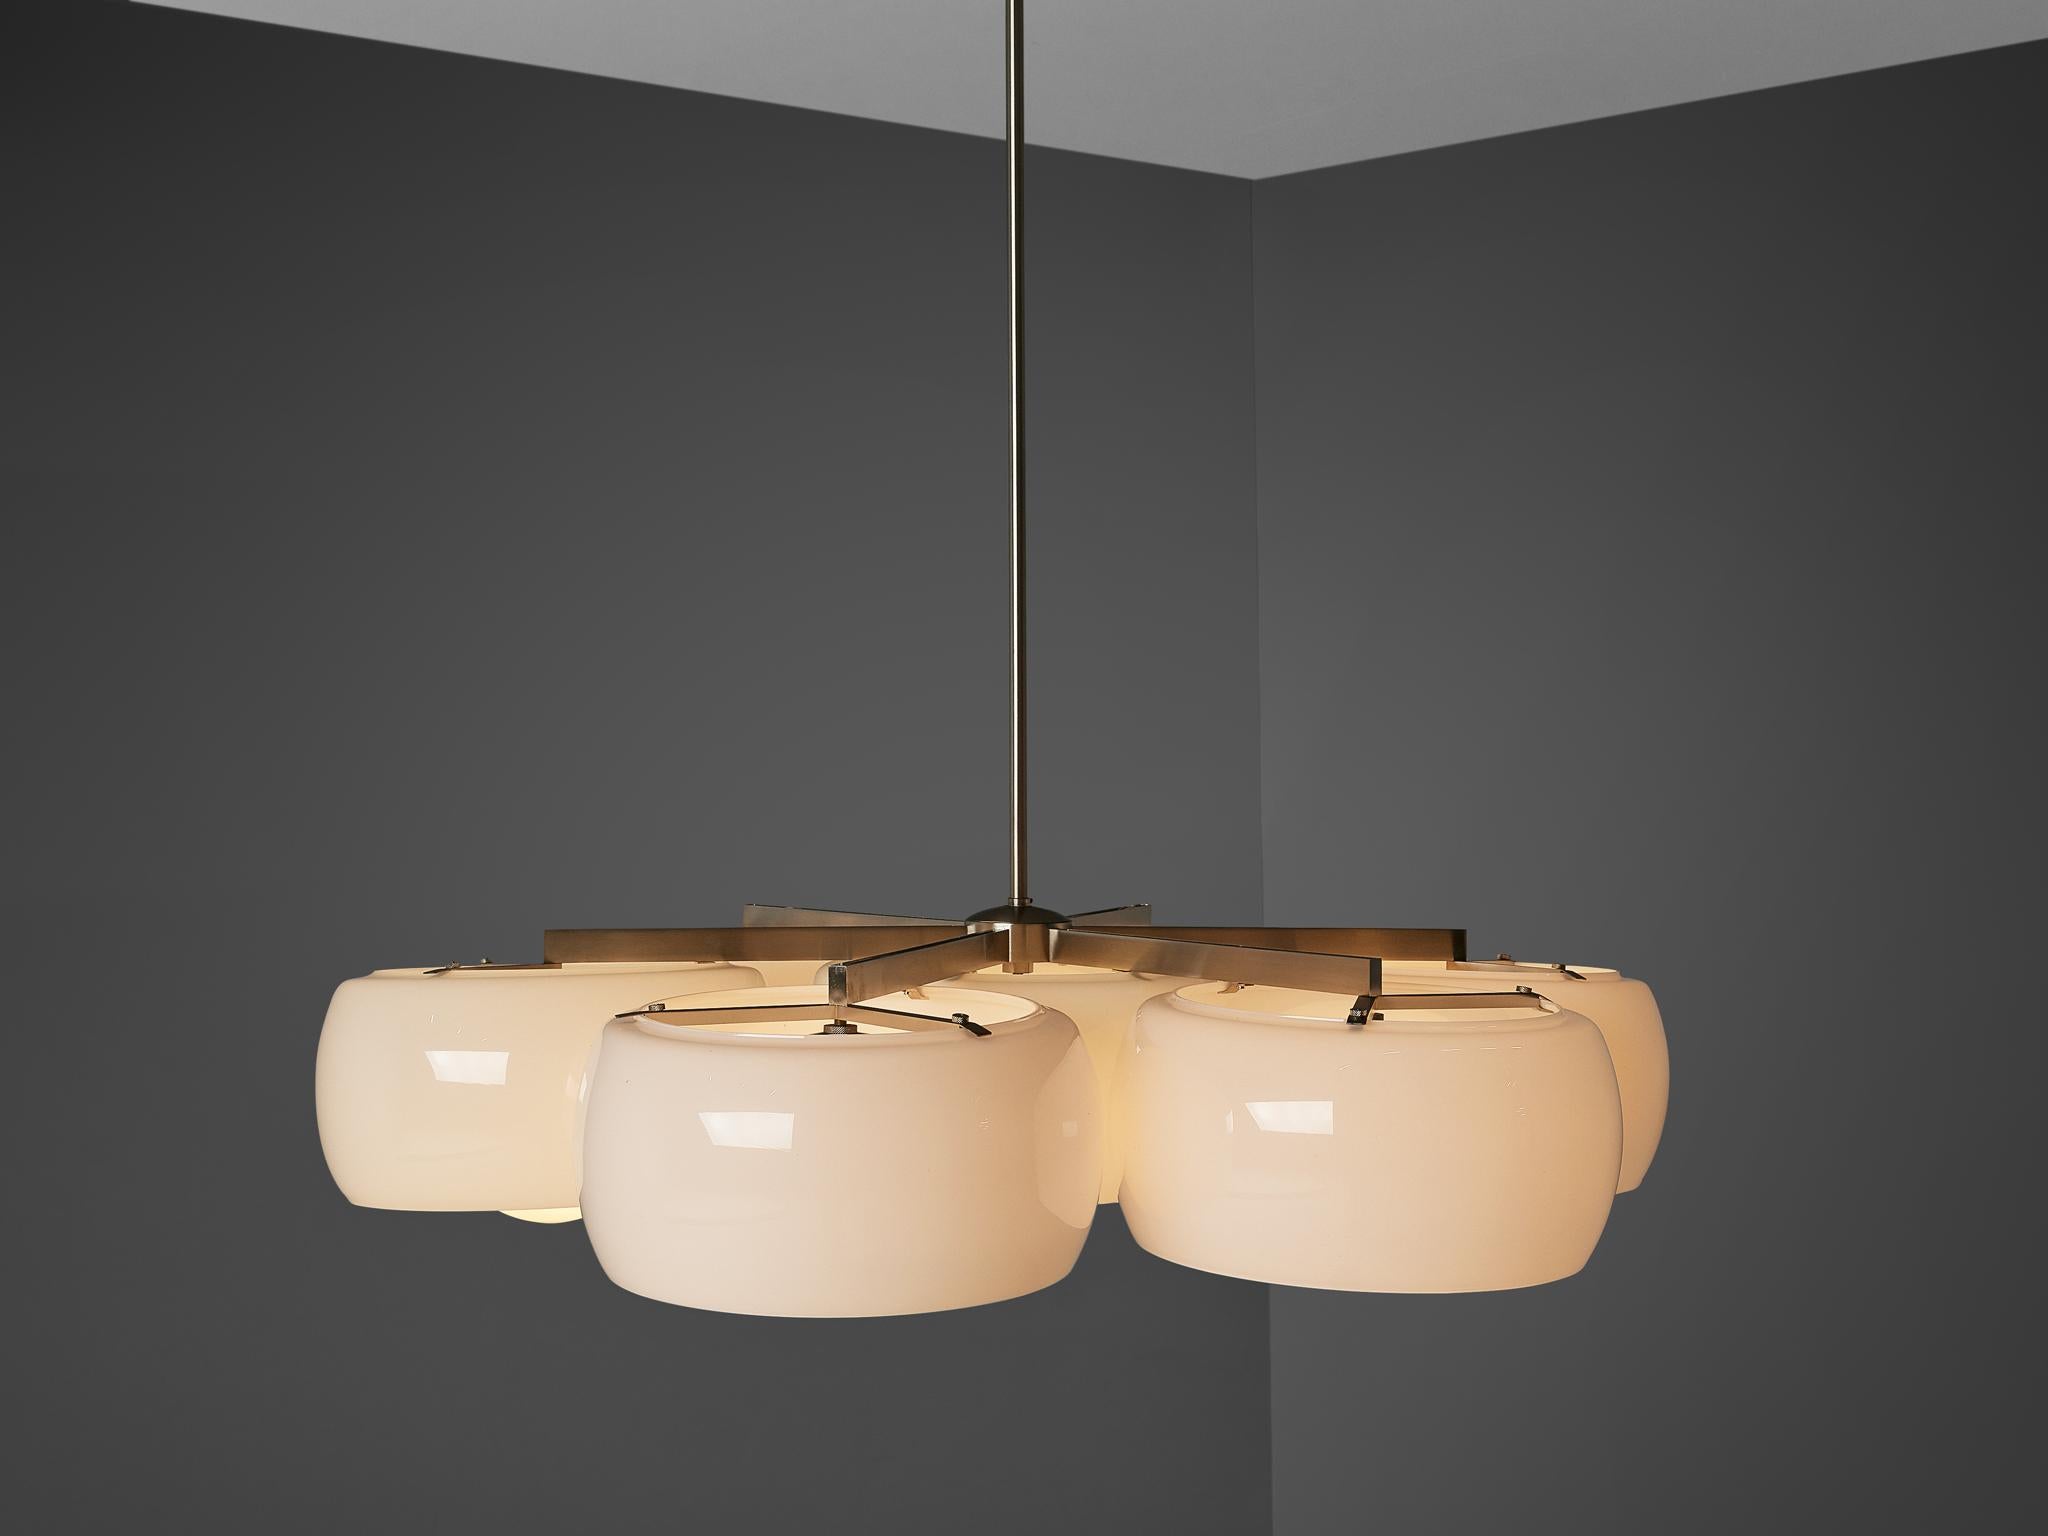 Metal Listing for KNS: Vico Magistretti for Artemide Chandelier 'Eptaclinio'